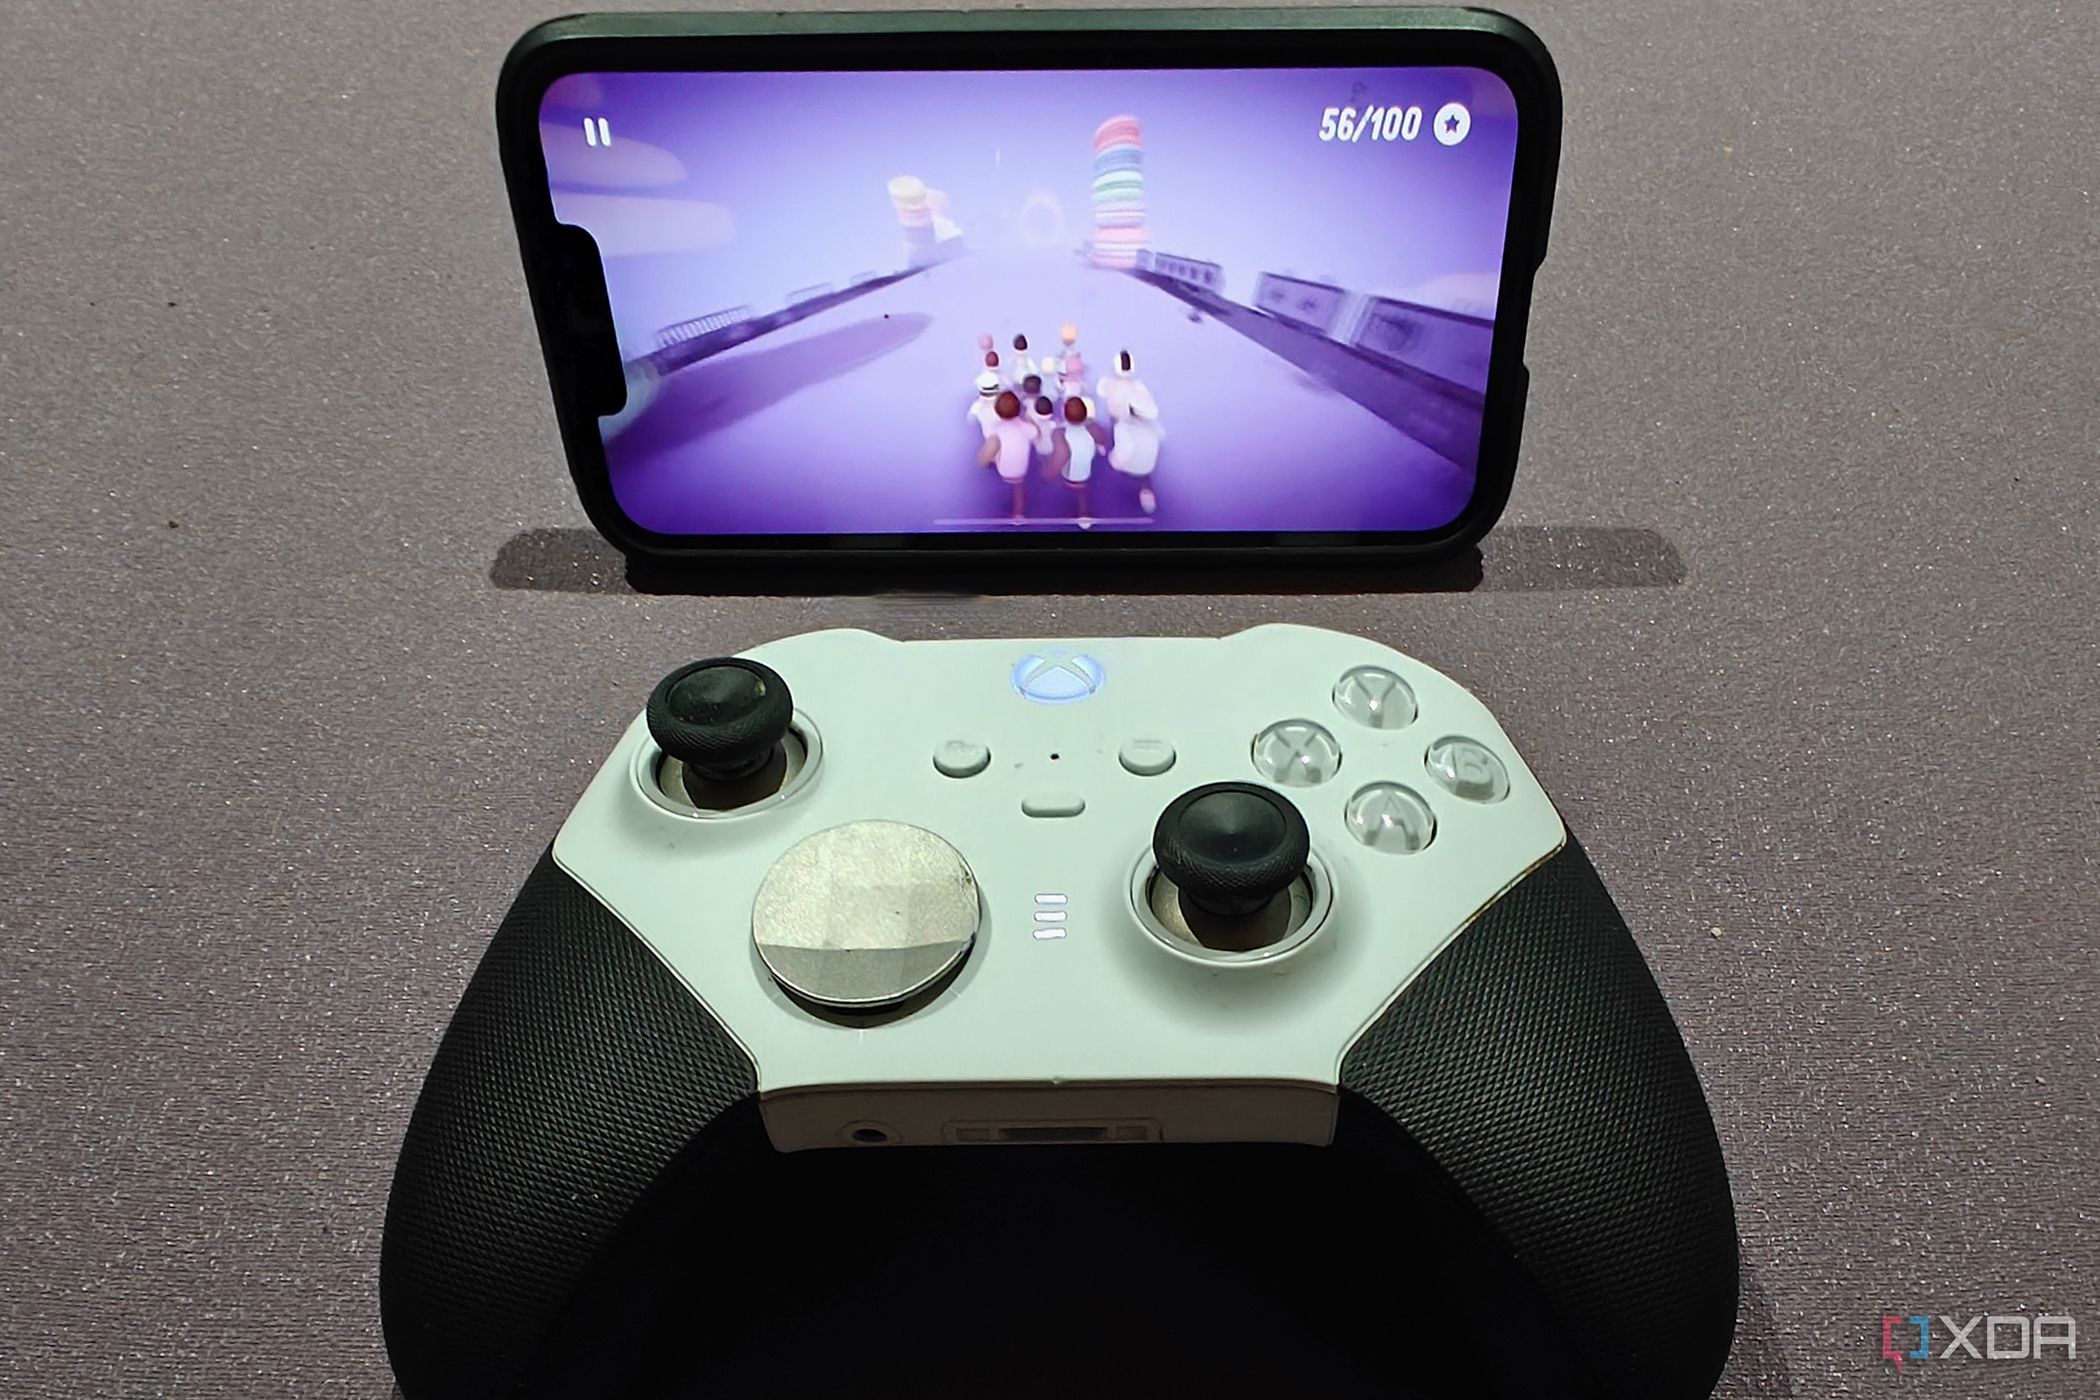 An Xbox controller in front of an iPhone showing the game Populus Run.